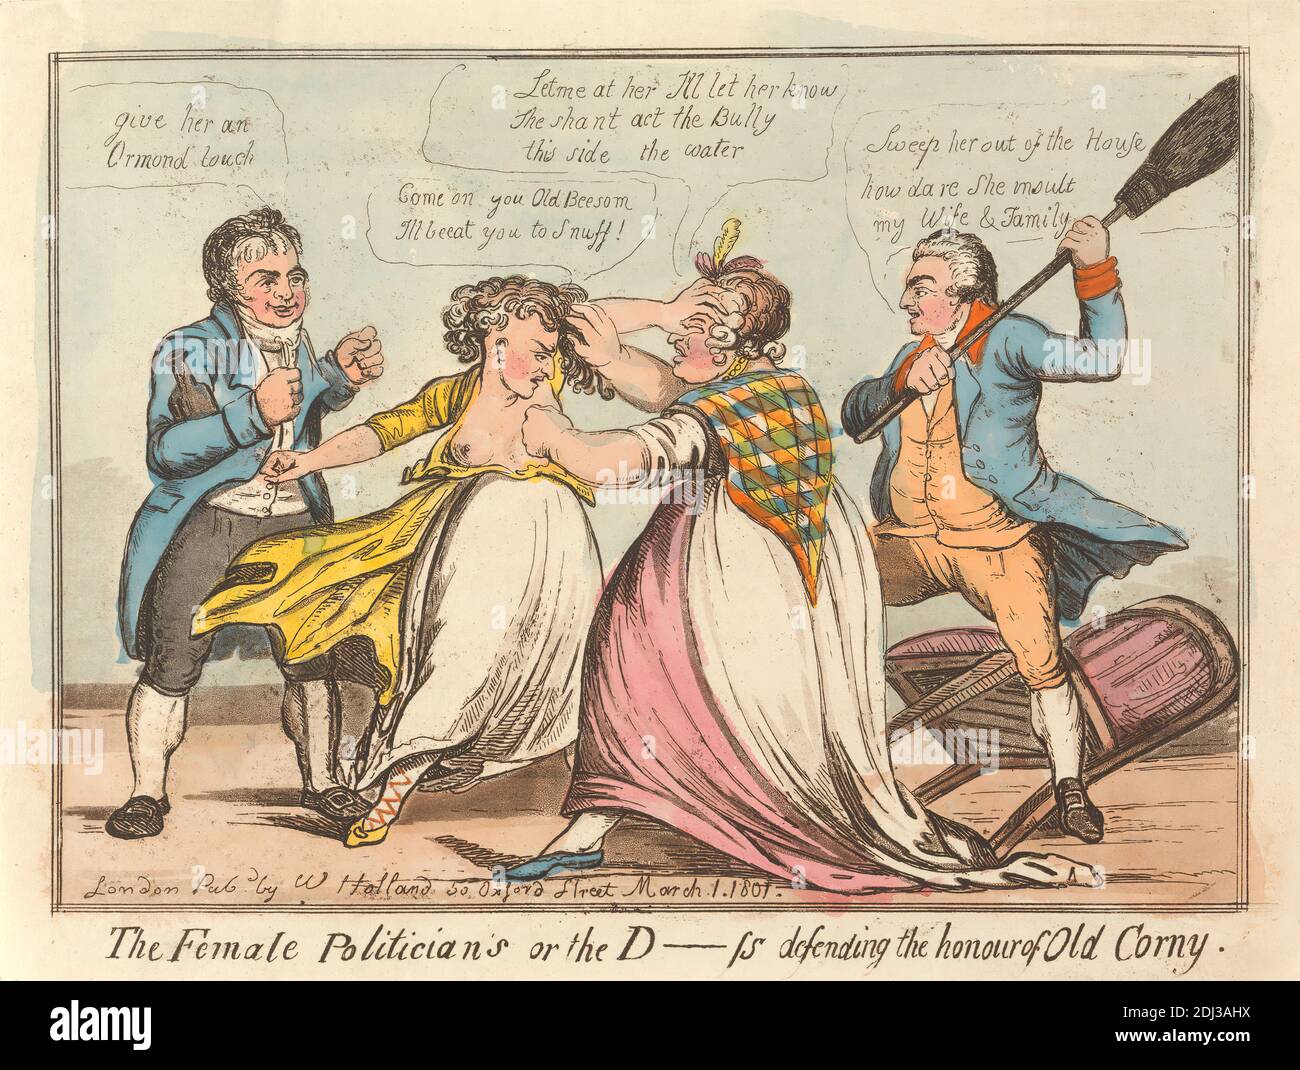 The Female Politicians, Or - The D____ss Defending the Honour of Old Corny, unknown artist, 1801, Etching and aquatint, hand-colored, Sheet: 7 15/16 x 11in. (20.2 x 27.9cm Stock Photo